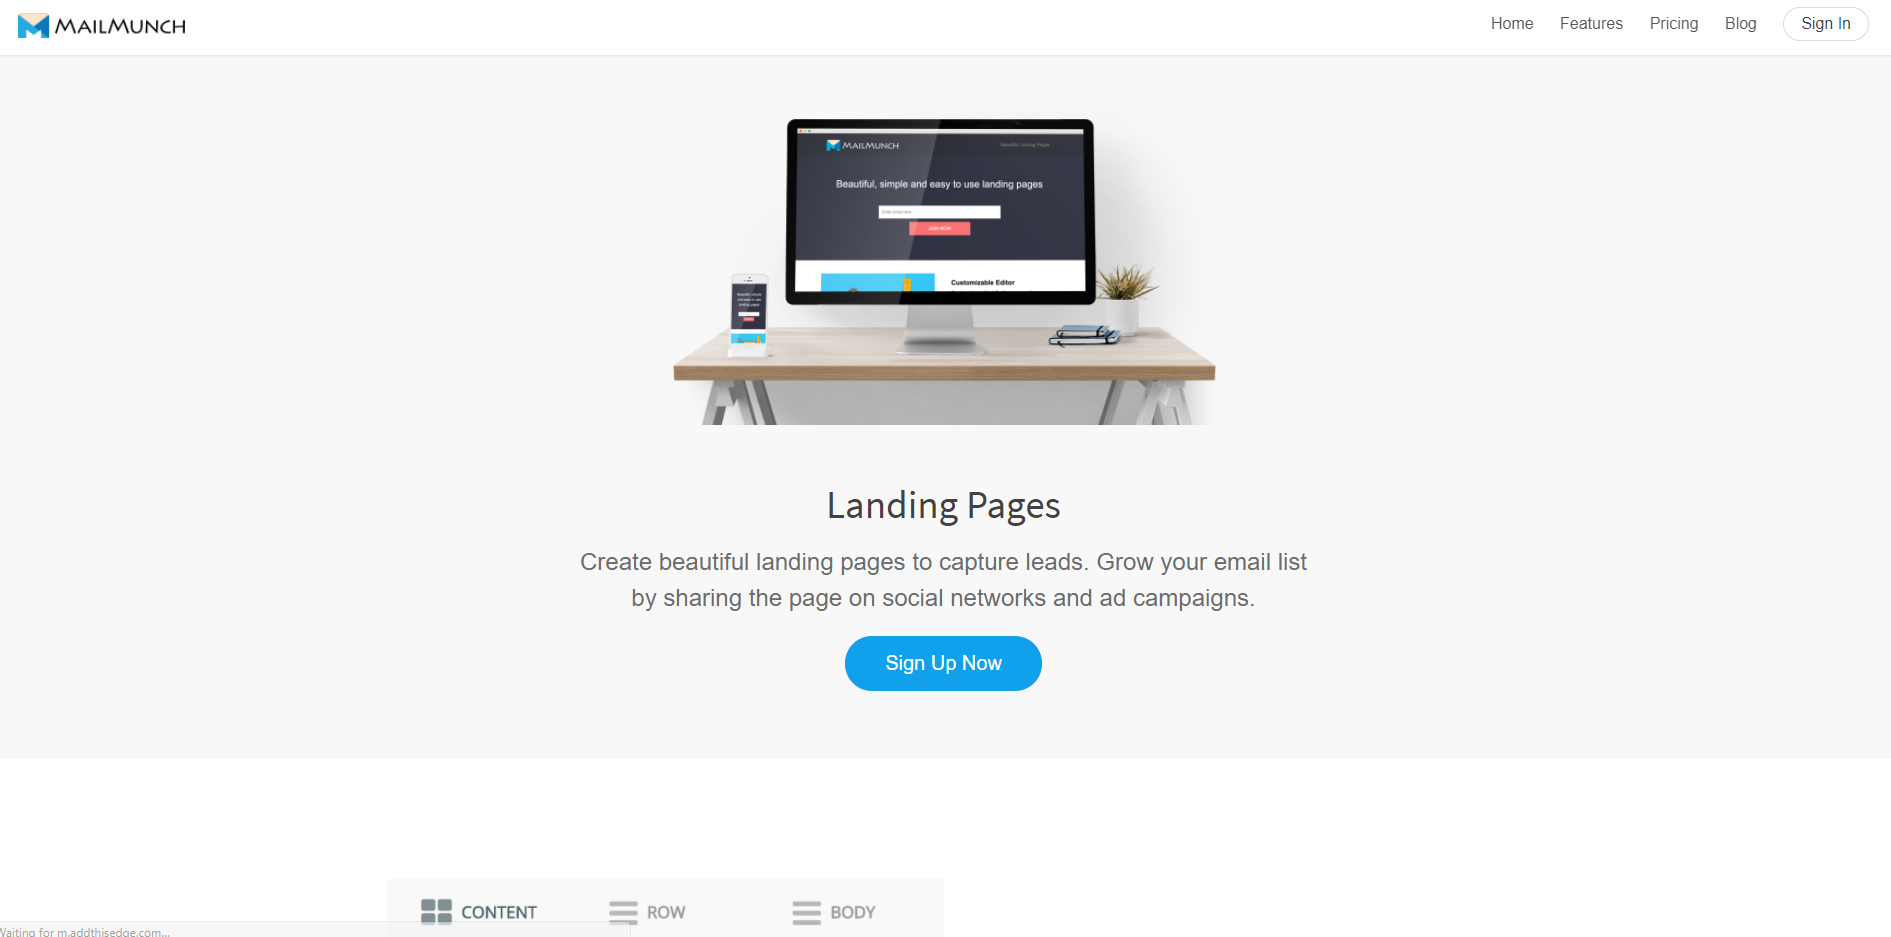 MailMunch Landing Pages